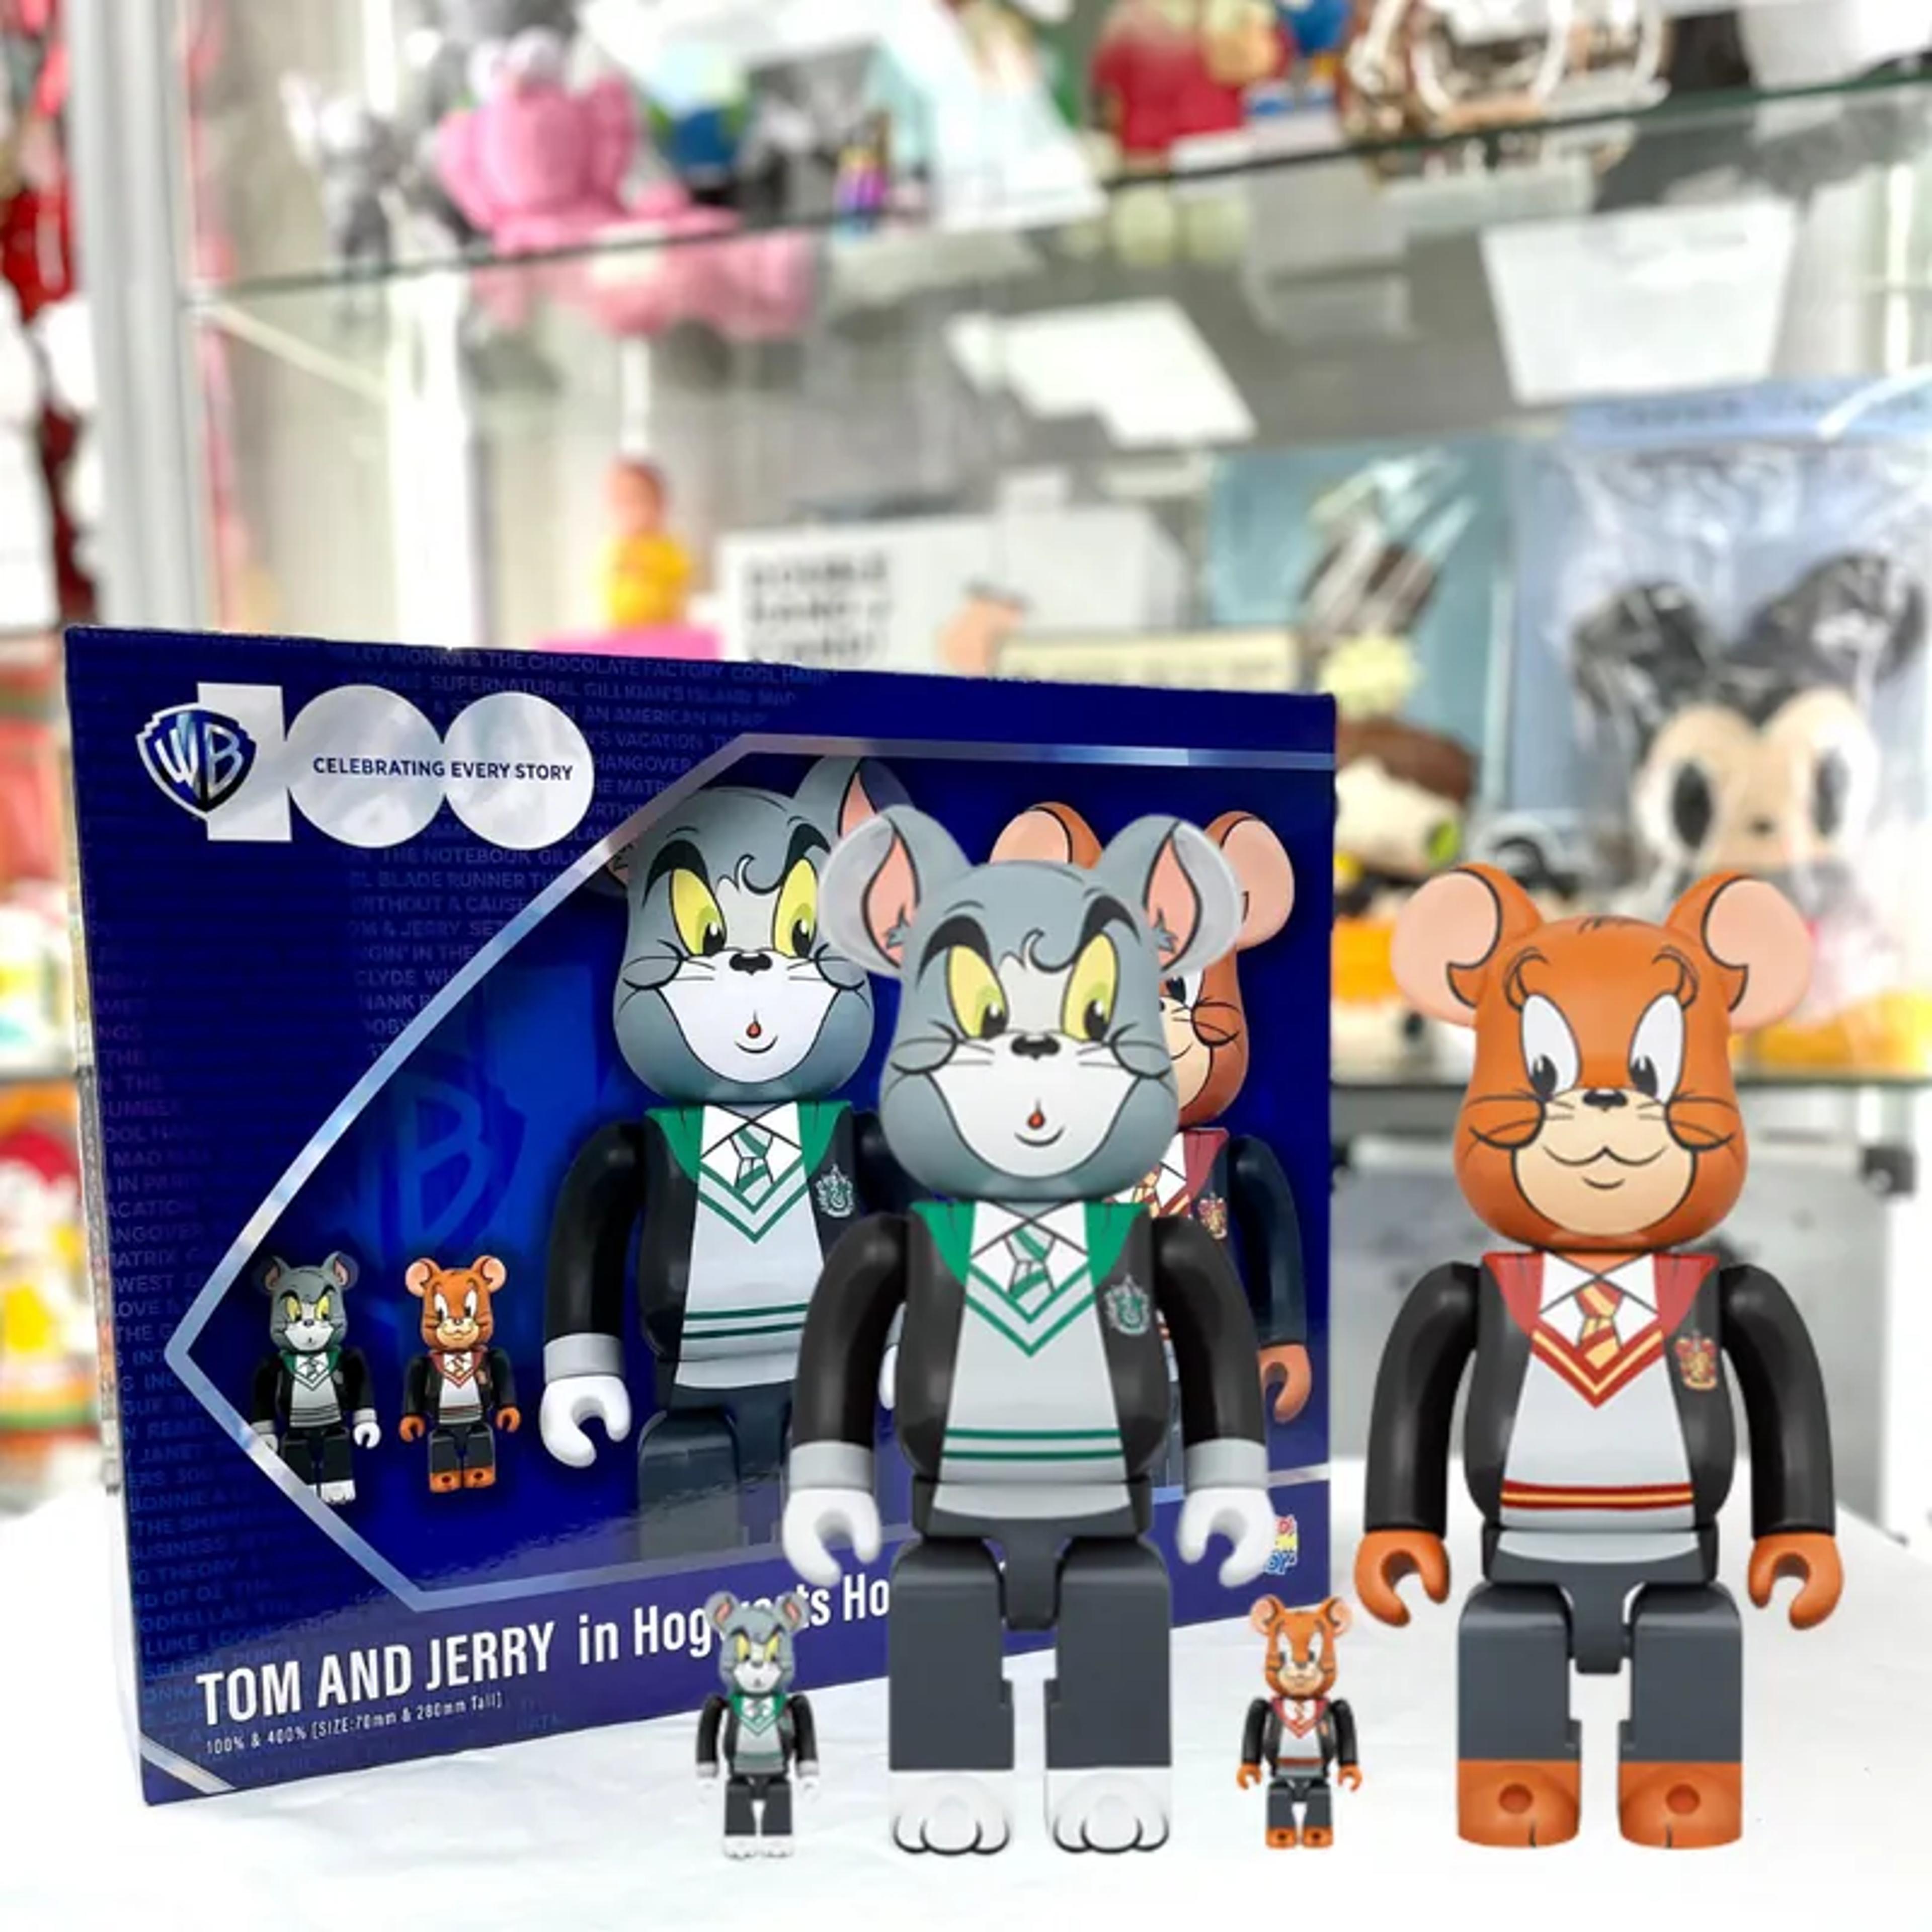 [Free shipping] BE@RBRICK TOM AND JERRY in Hogwarts House Robes